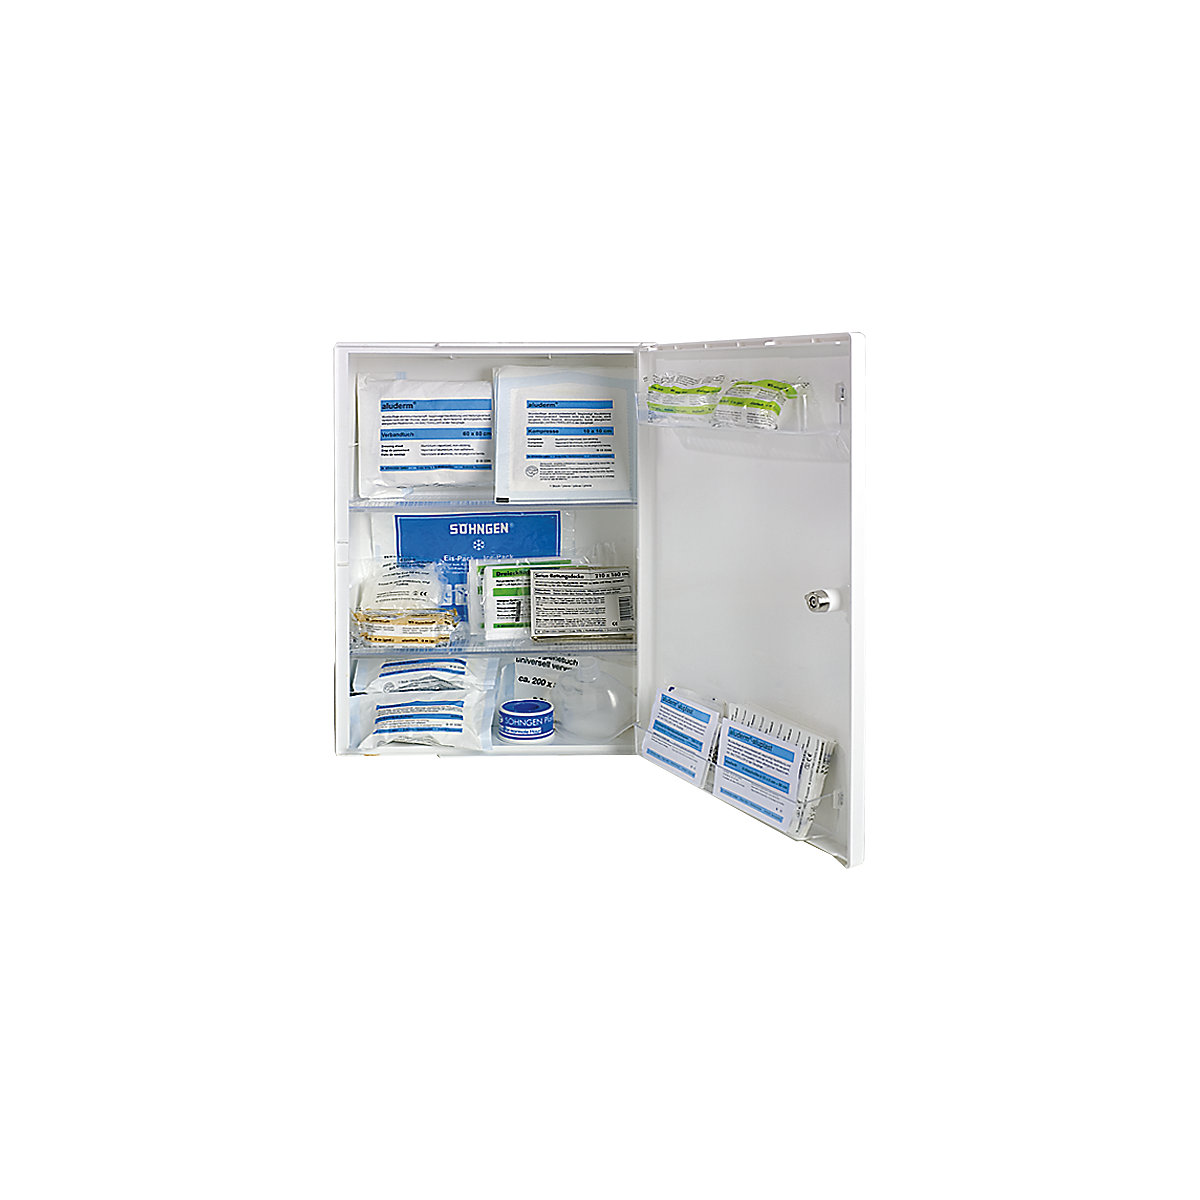 SÖHNGEN – First aid cupboard, DIN 13157, with contents, white, depth 150 mm, HxW 429 x 315 mm